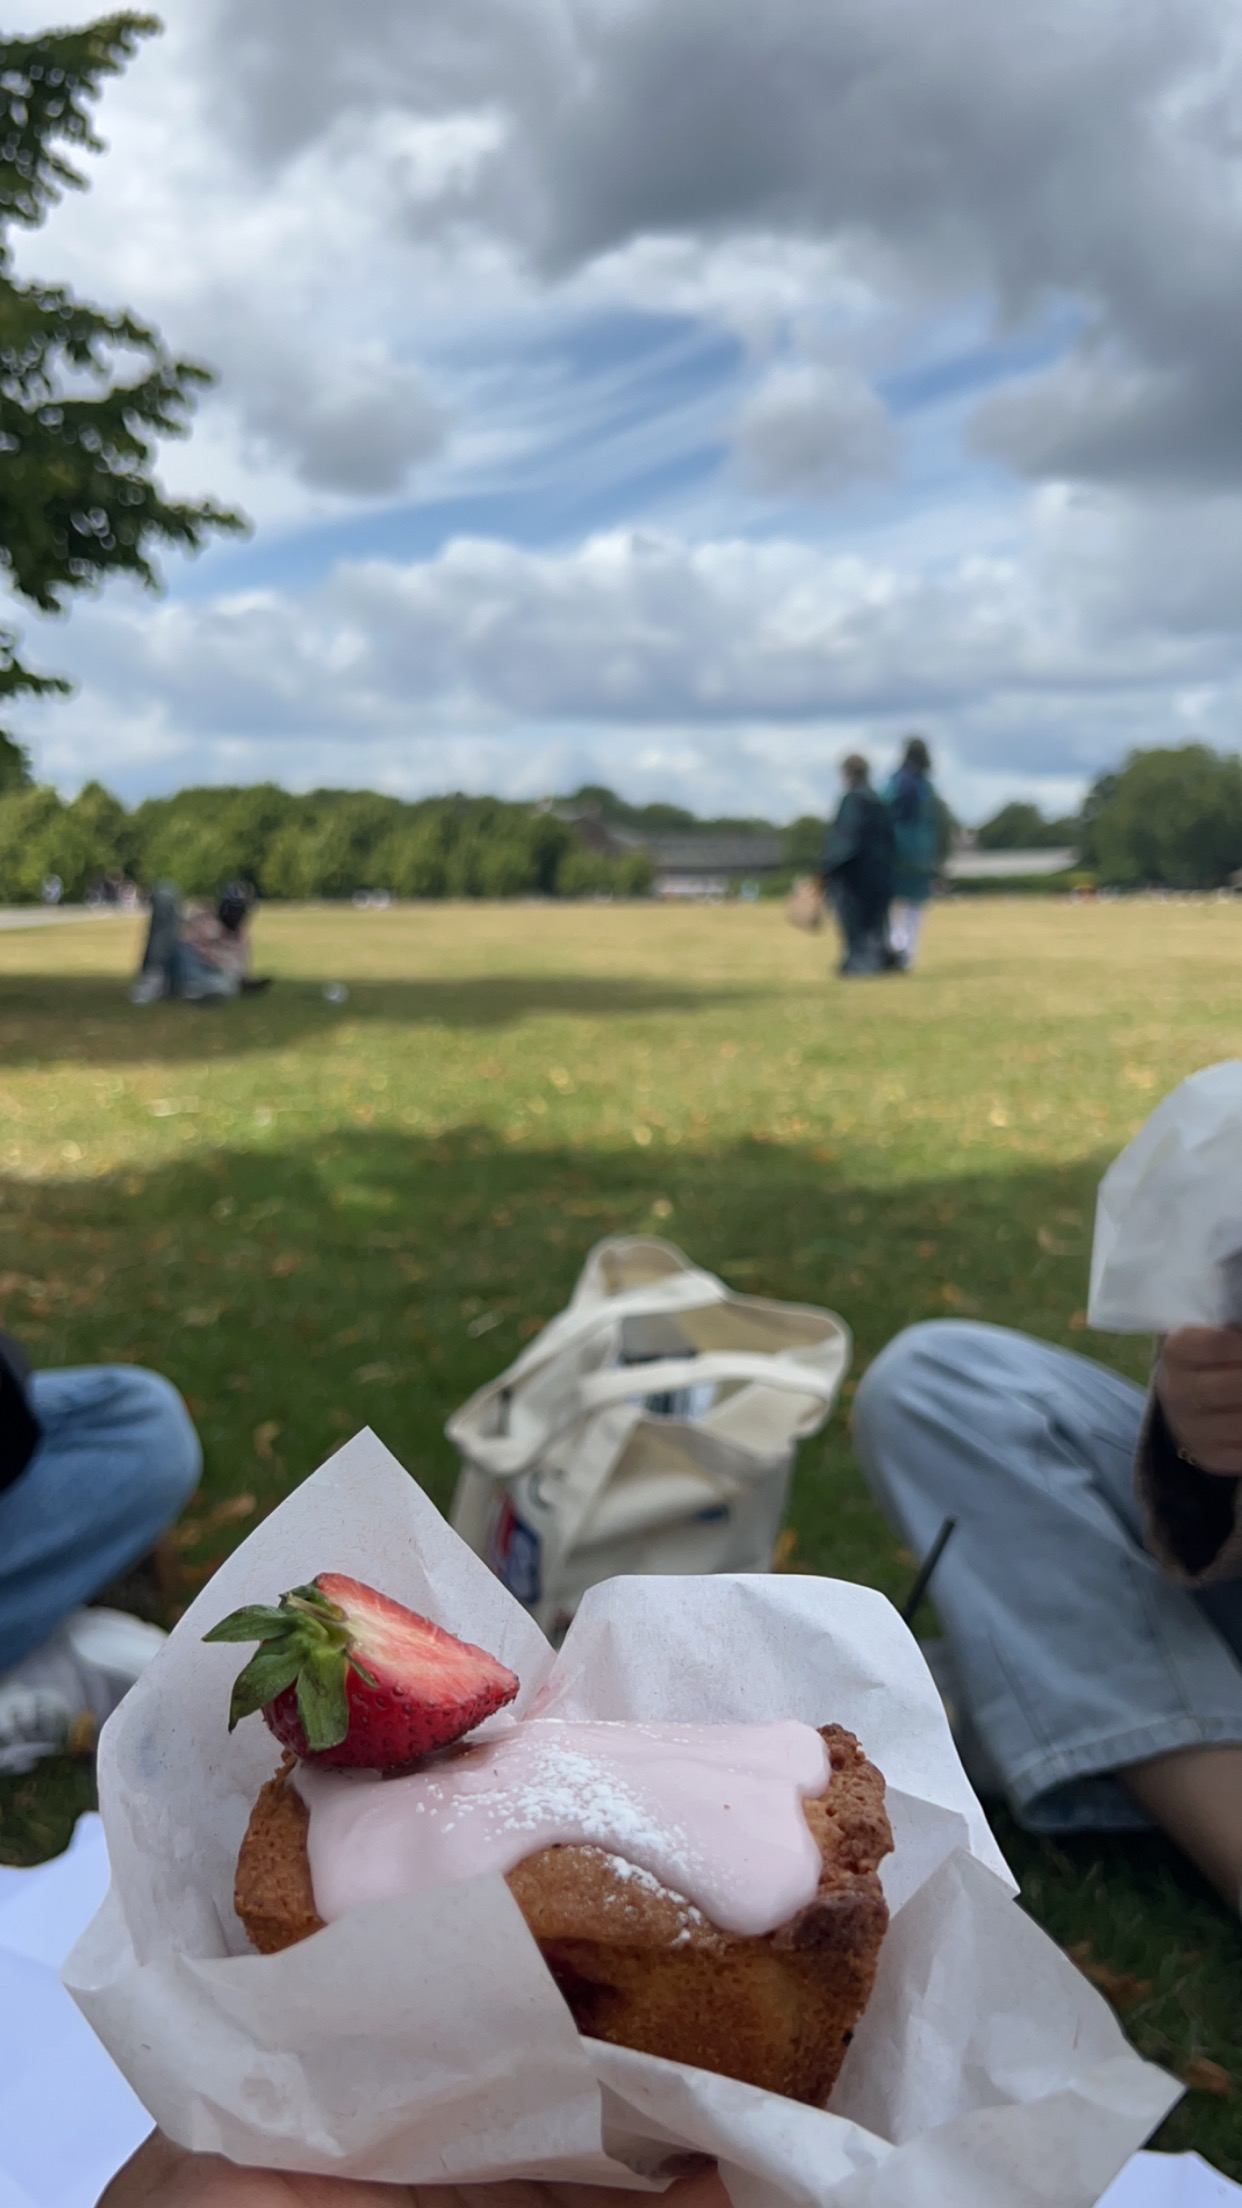 A picnic in hyde park